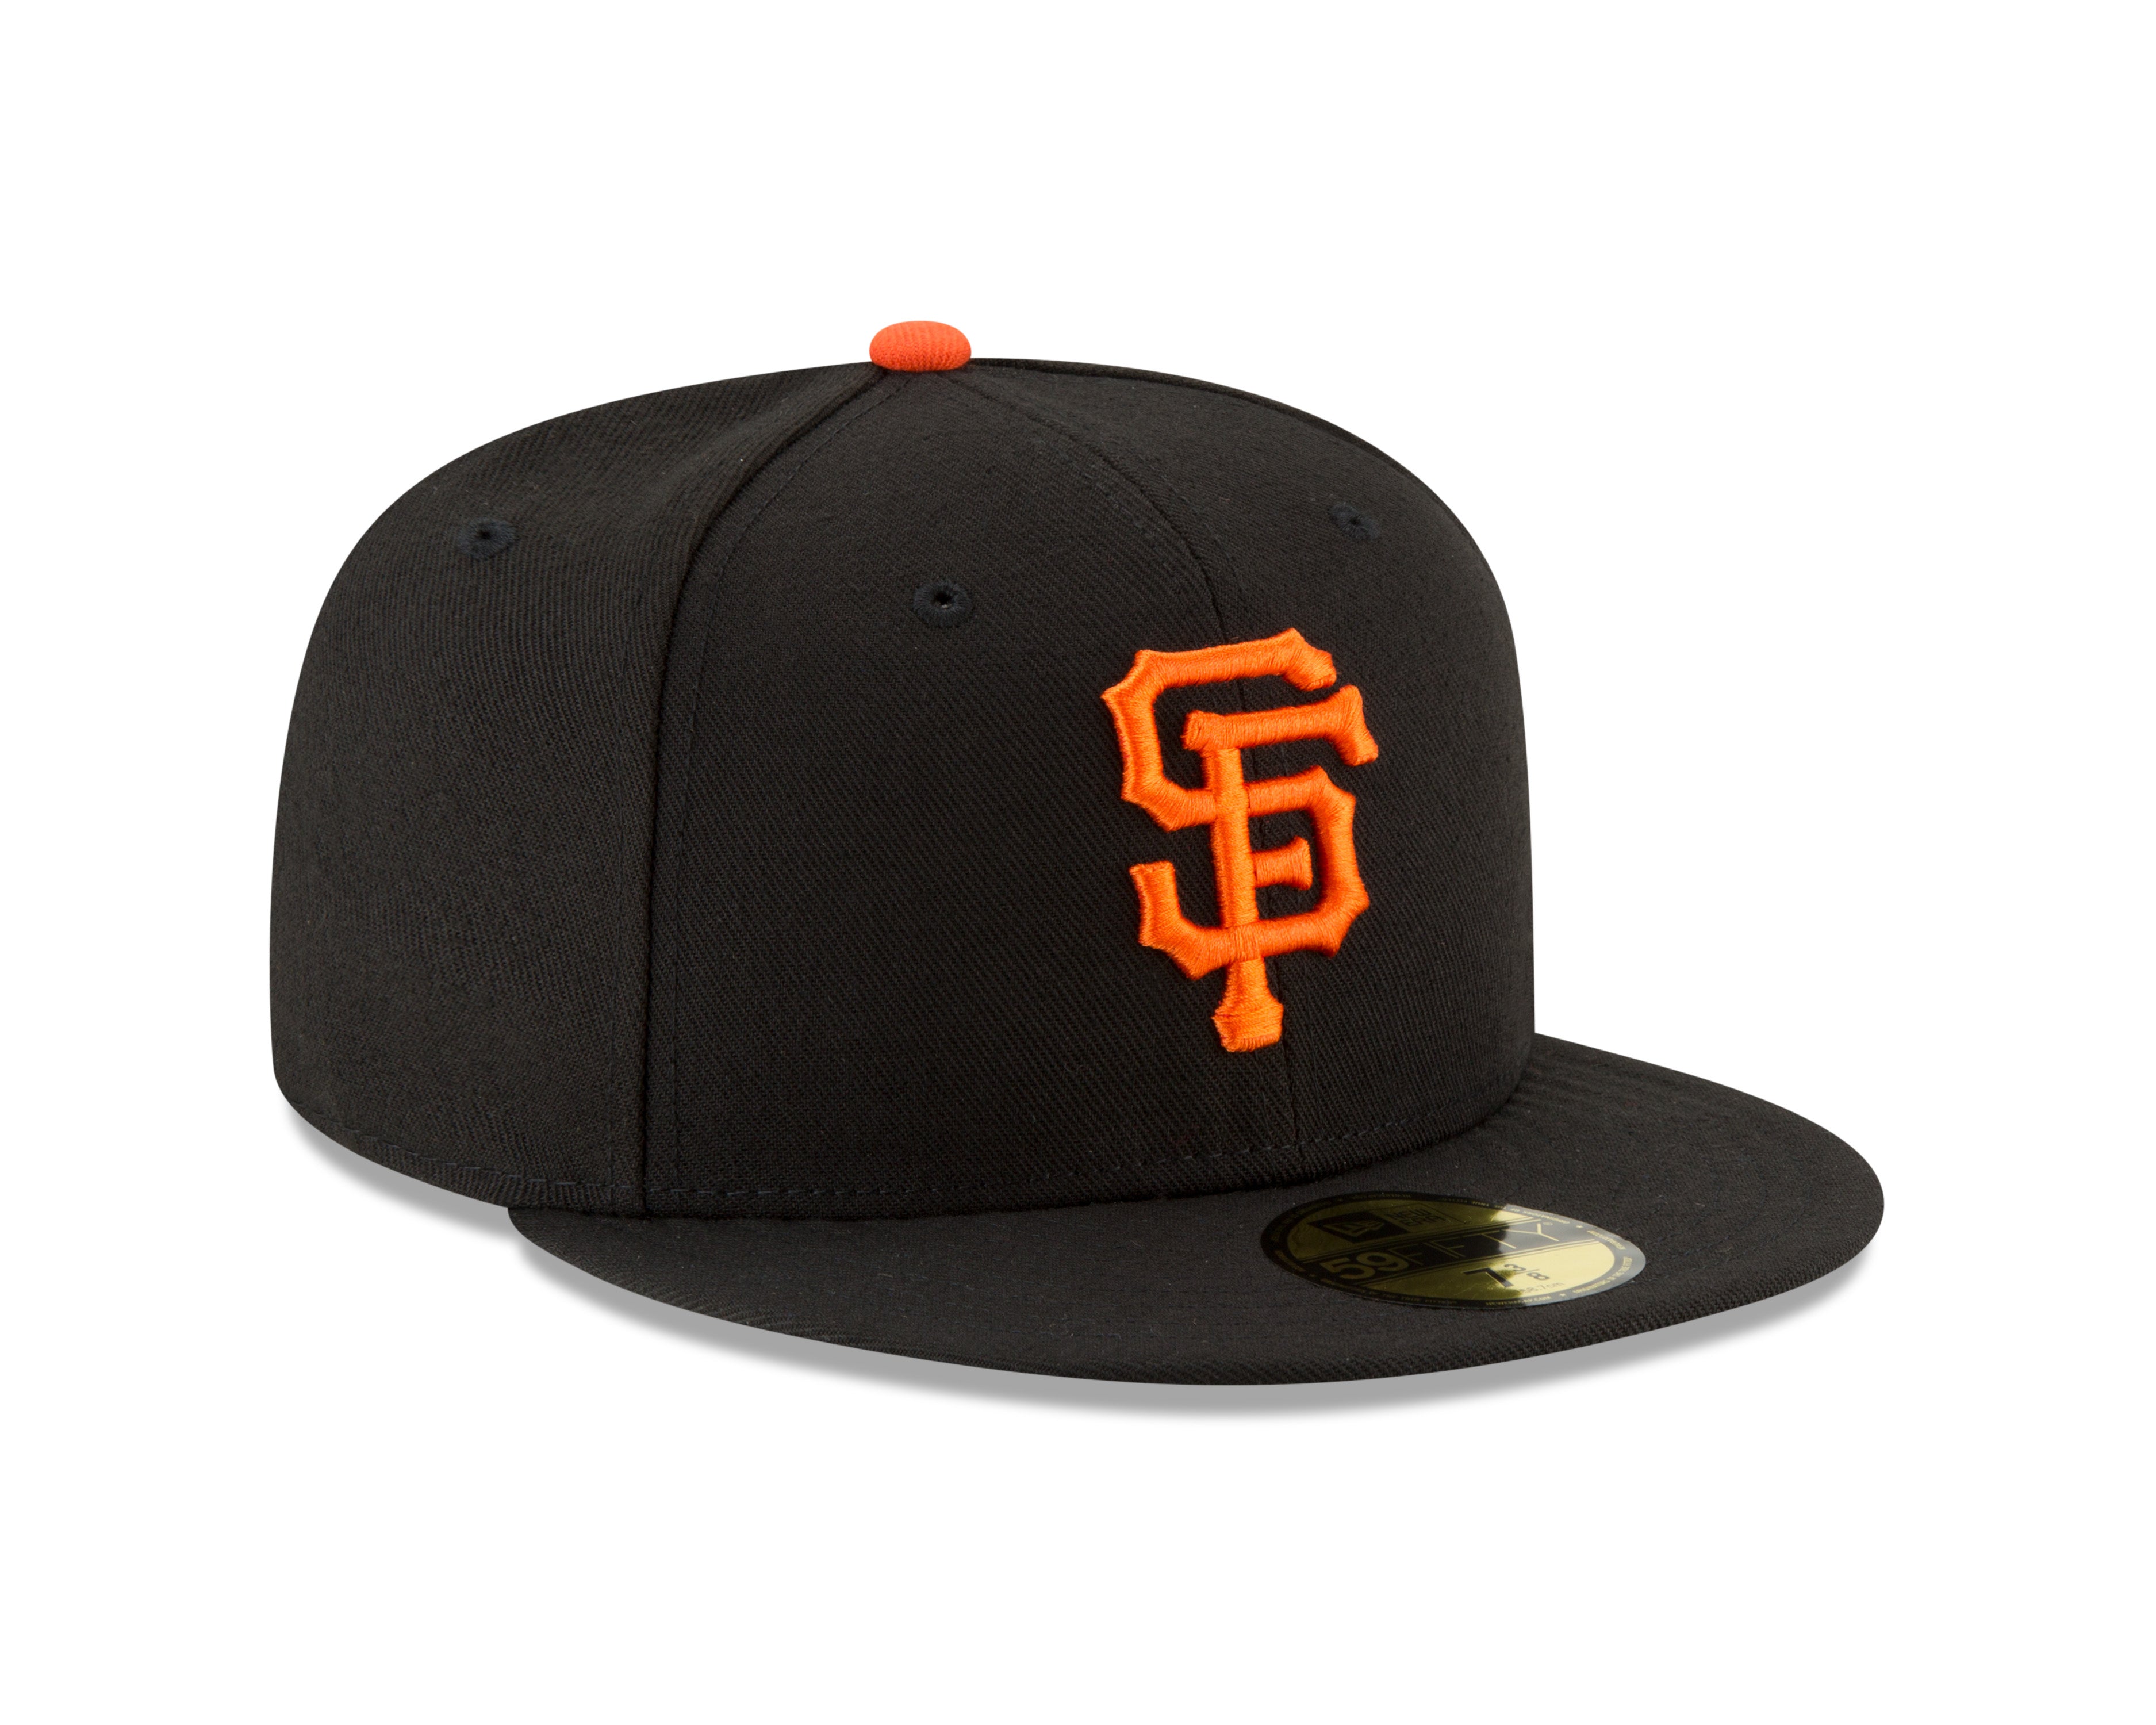 New Era Black San Francisco Giants Game Authentic Collection On-Field 59FIFTY Fitted Hat